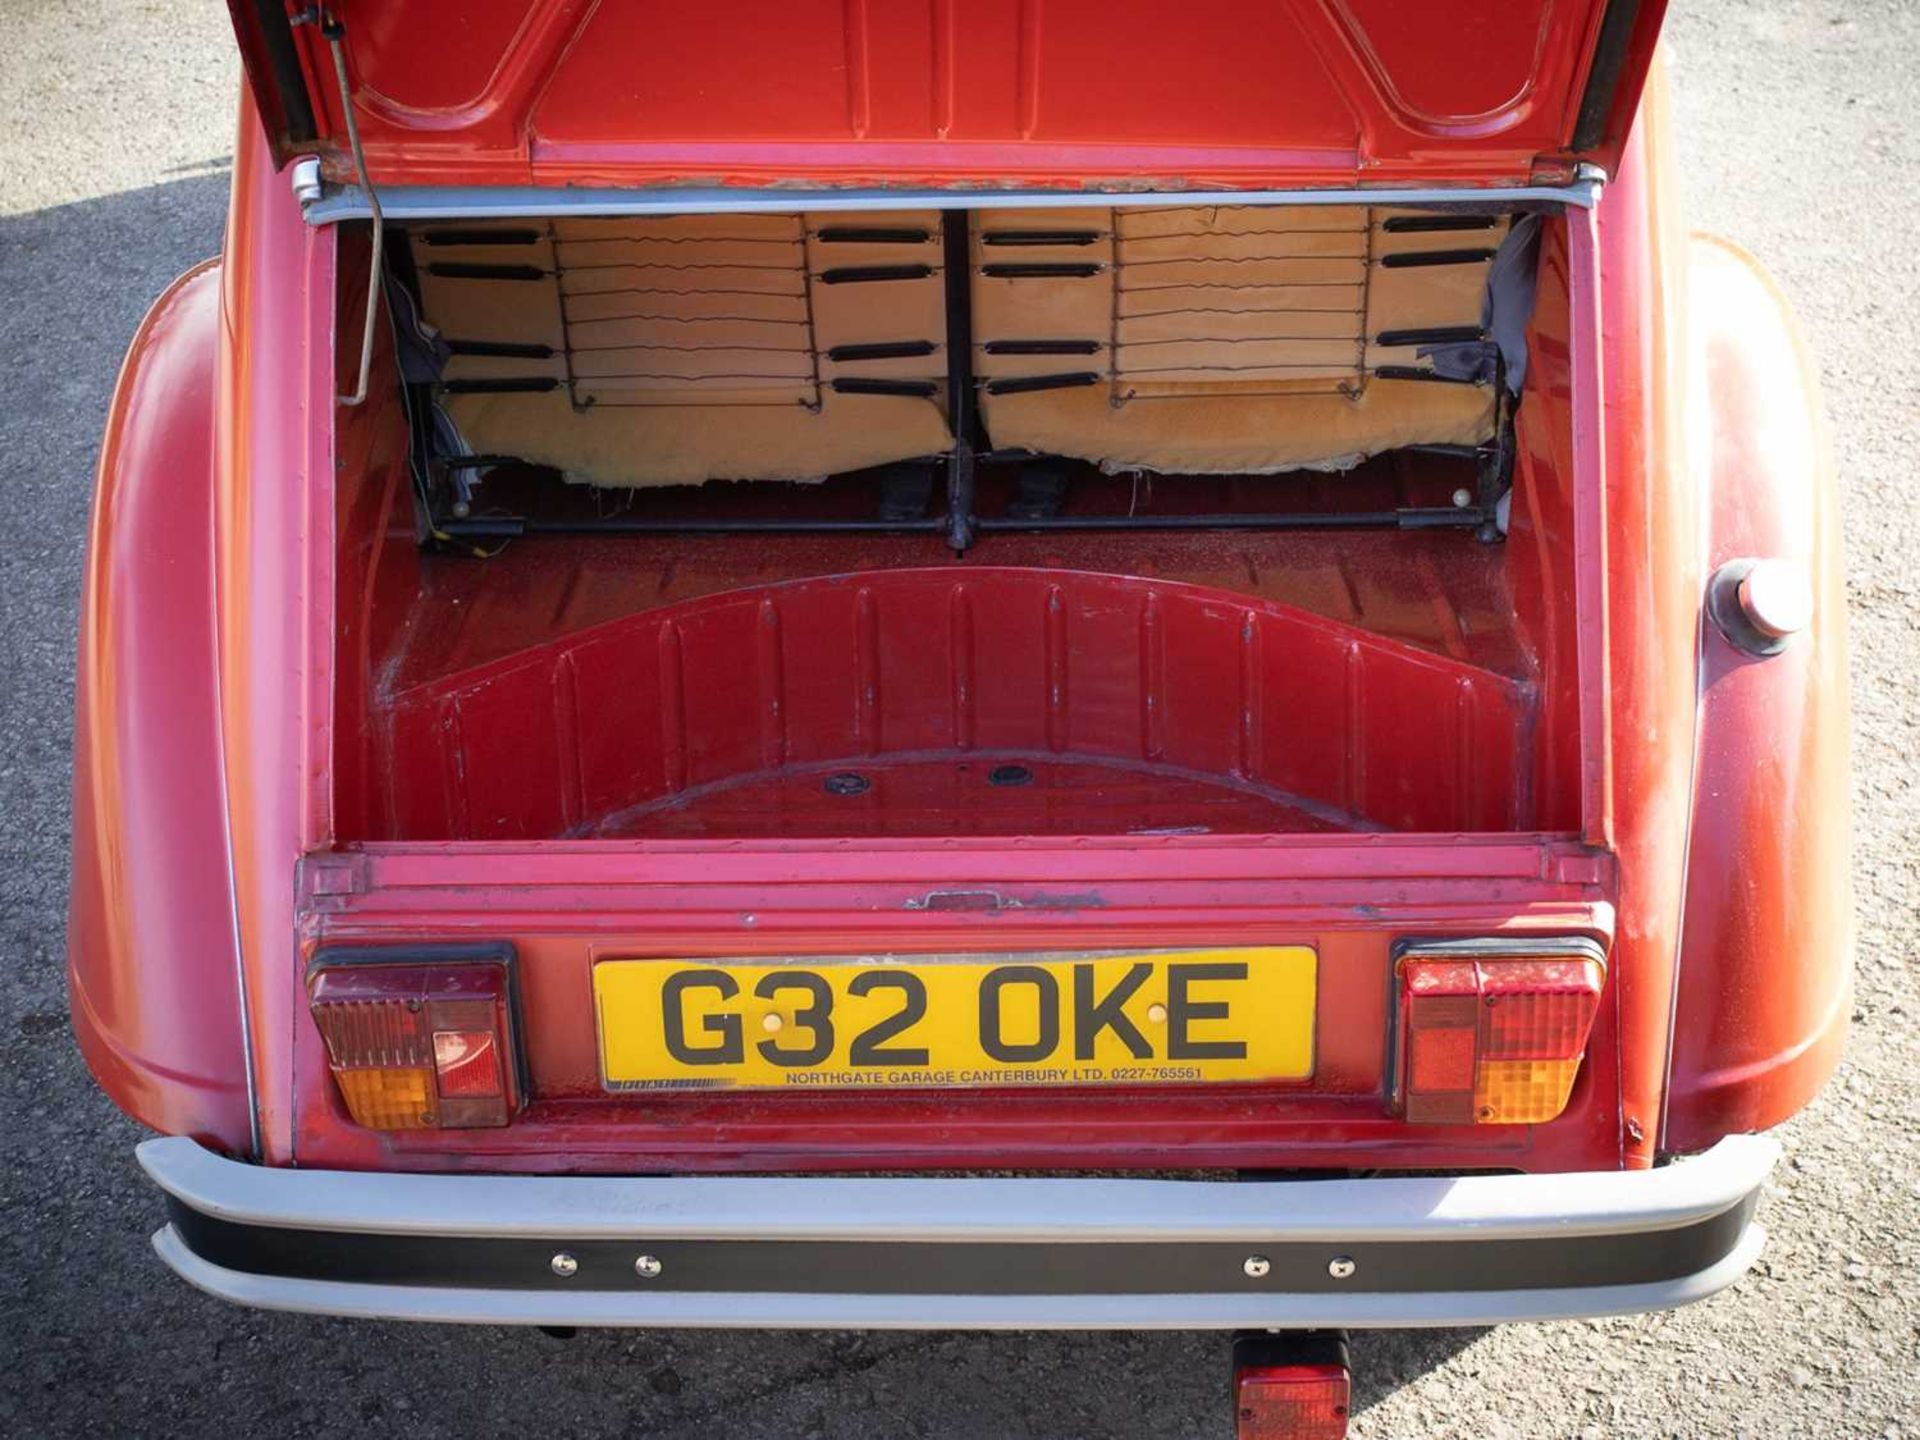 1989 Citroën 2CV6 Spécial Believed to have covered a credible 15,000 miles - Image 27 of 113